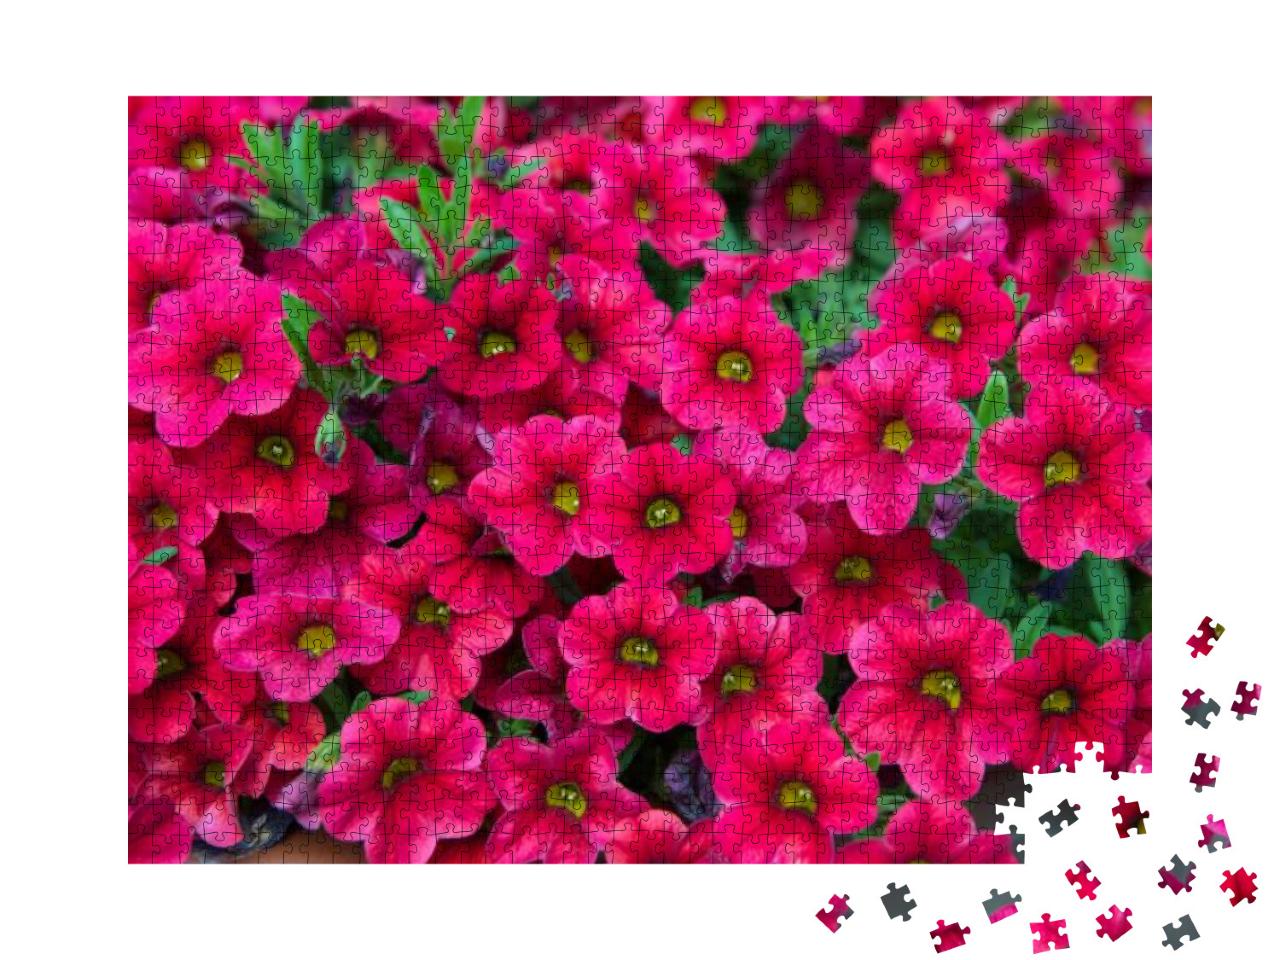 Petunia Plant with Pink Flowers, Petunia... Jigsaw Puzzle with 1000 pieces